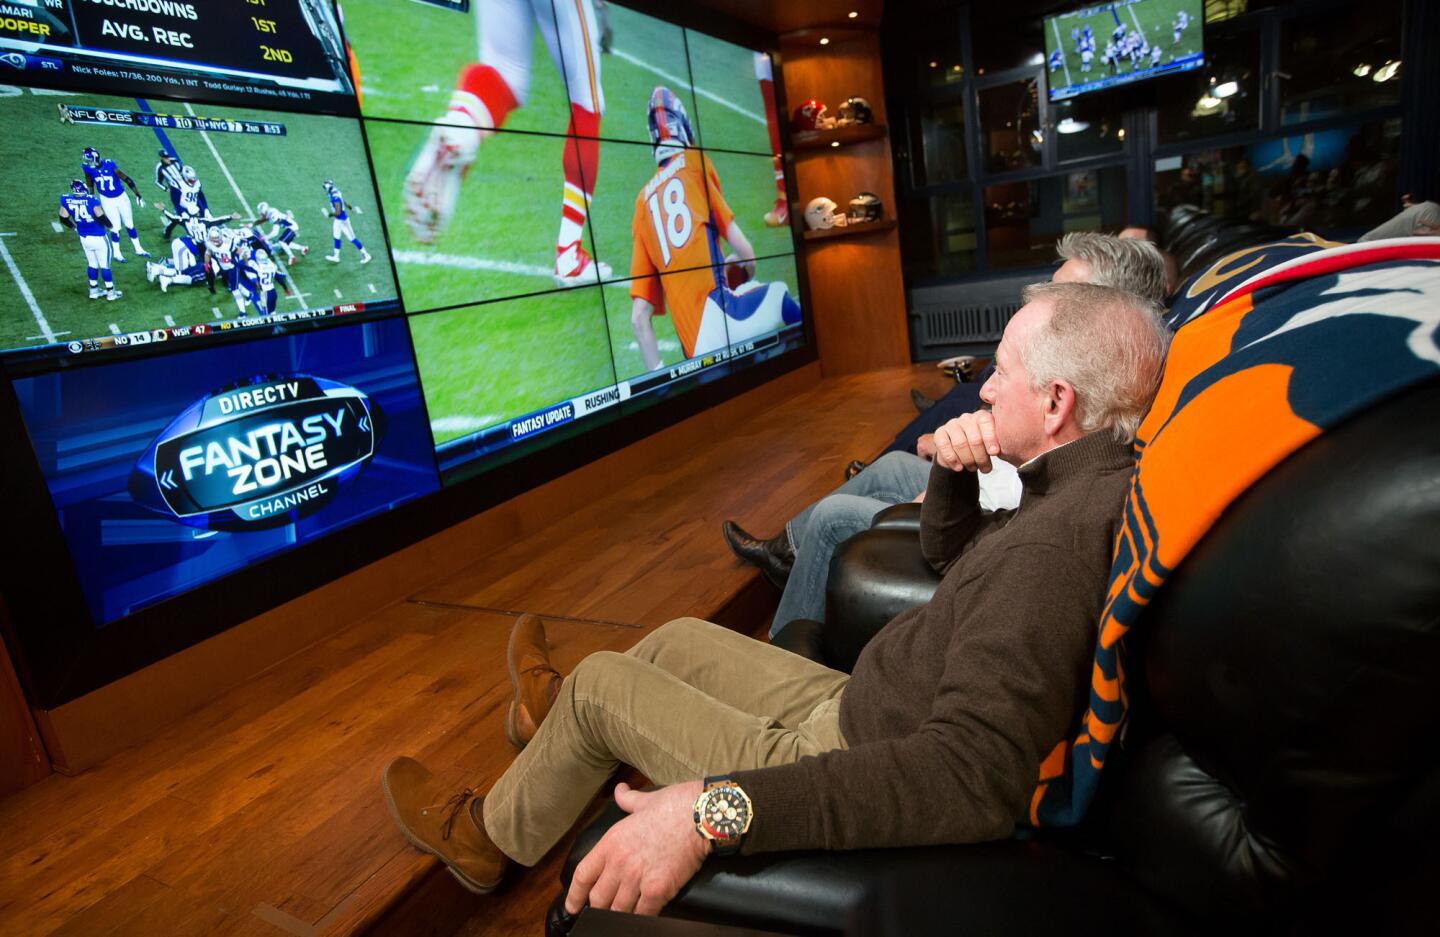 Archie Manning recalls Peyton's football trajectory, agrees with son's retirement